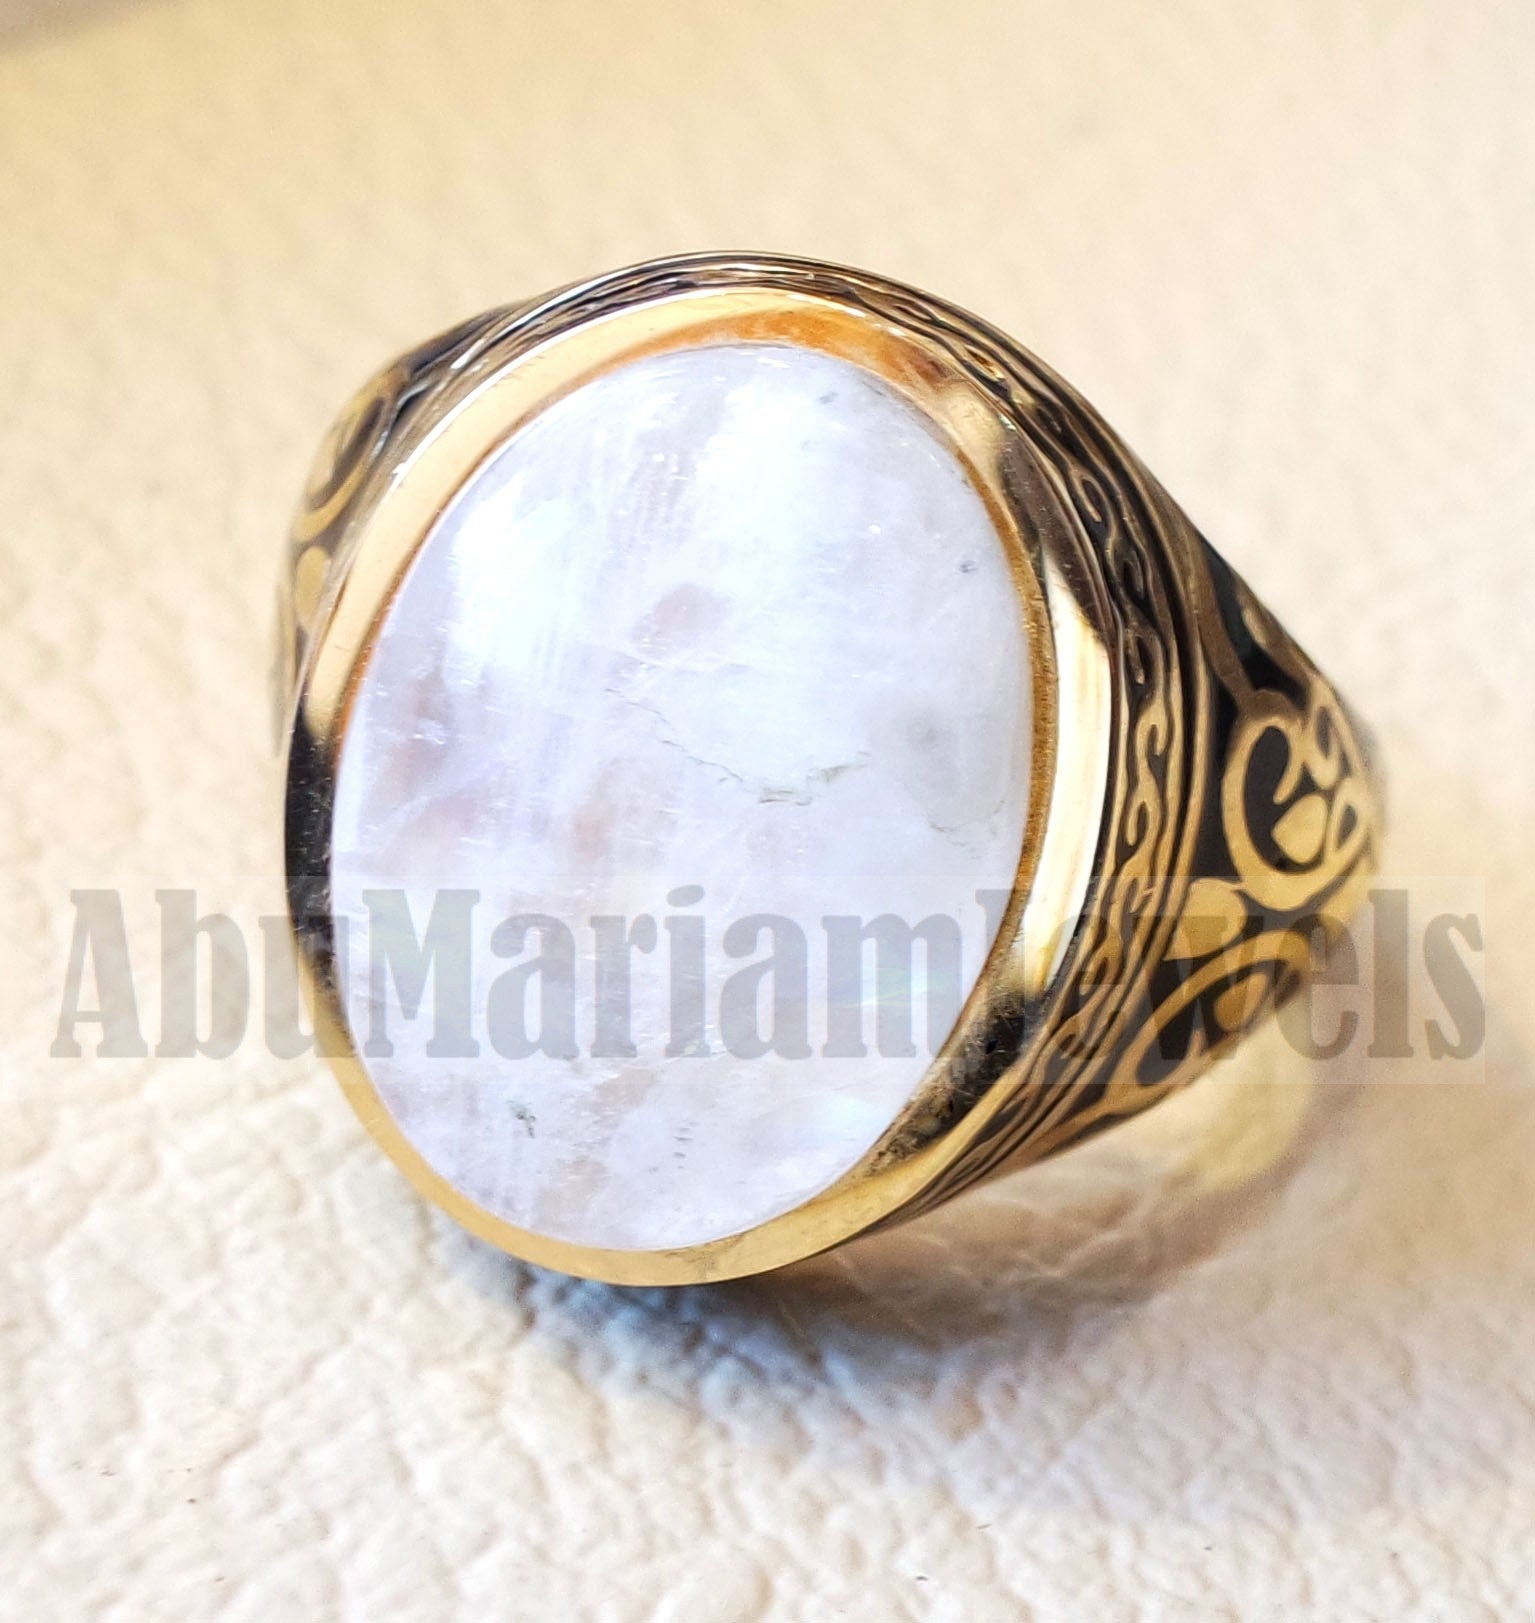 18k gold men ring moonstone cabochon high quality flashy white natural stone all sizes Ottoman signet style fine jewelry fast shipping